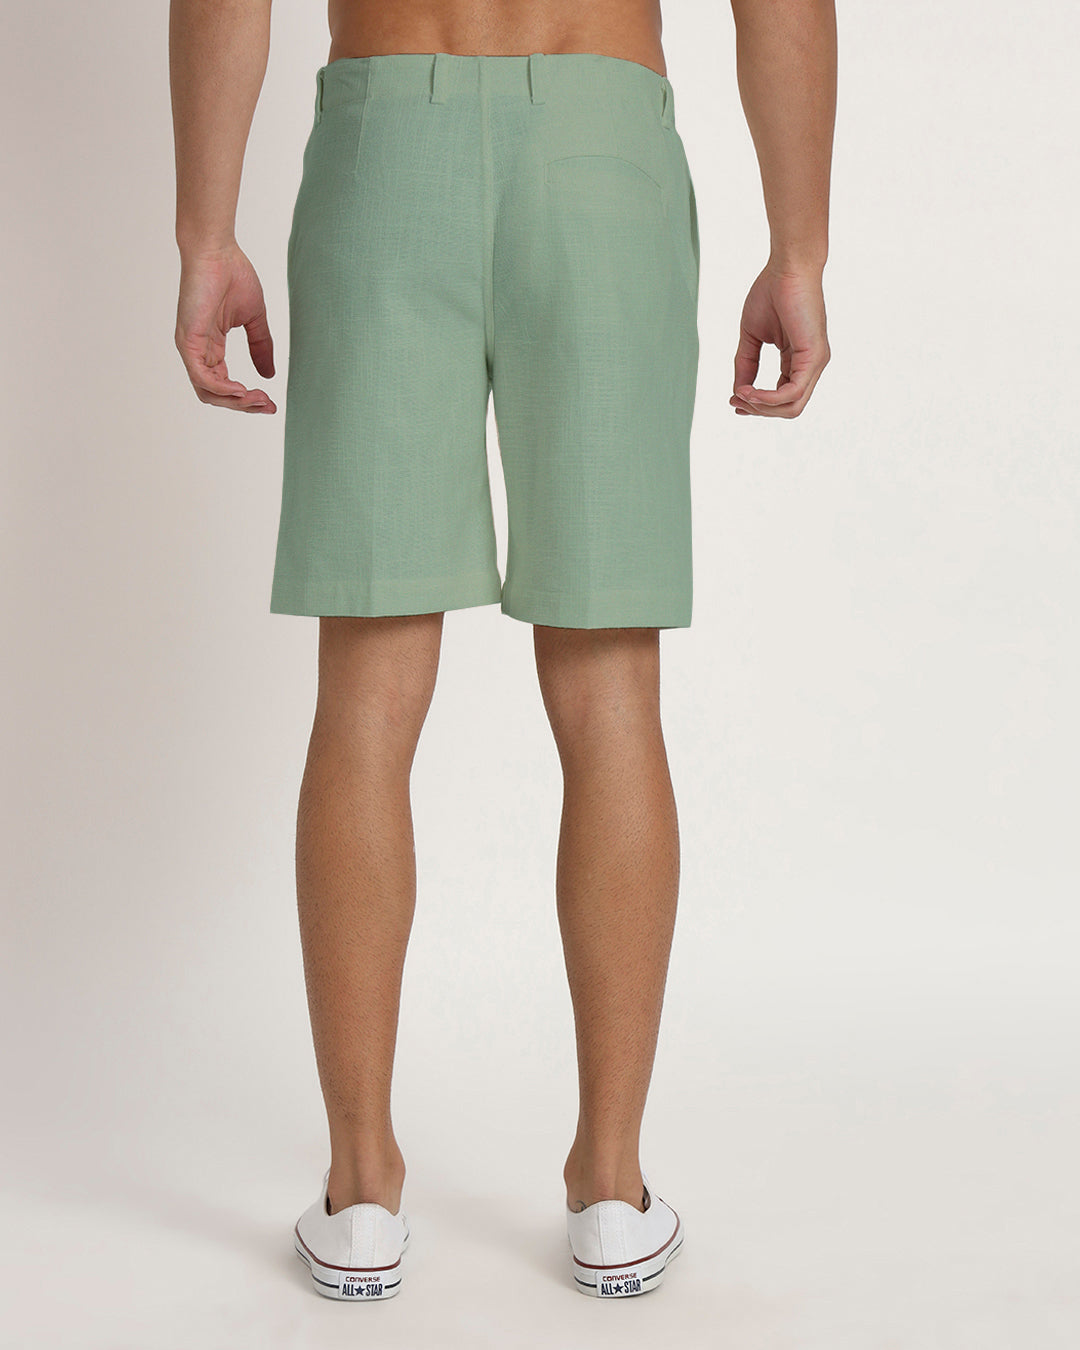 Ready For Anything Spring Green Men's Shorts